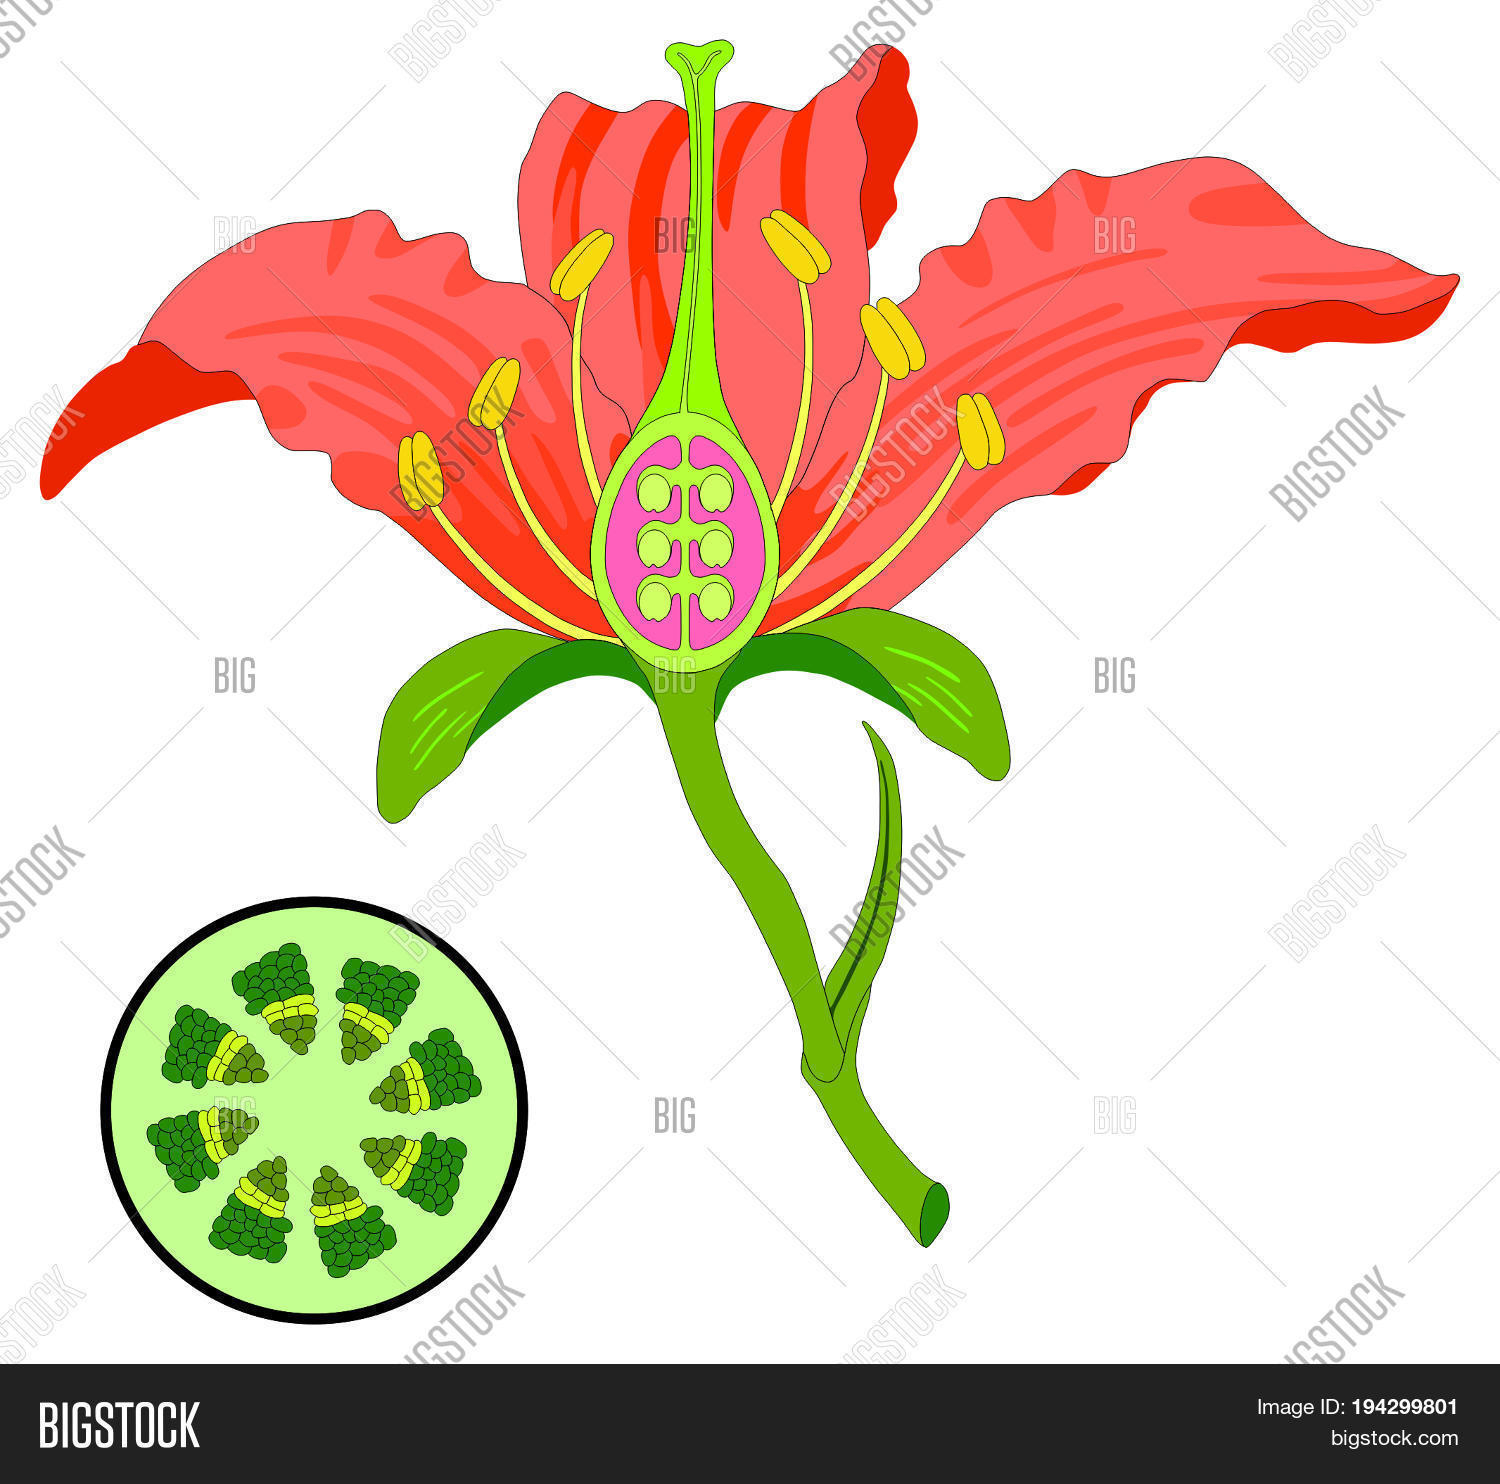 Parts Of A Flower Diagram Flower Parts Diagram Image Photo Free Trial Bigstock